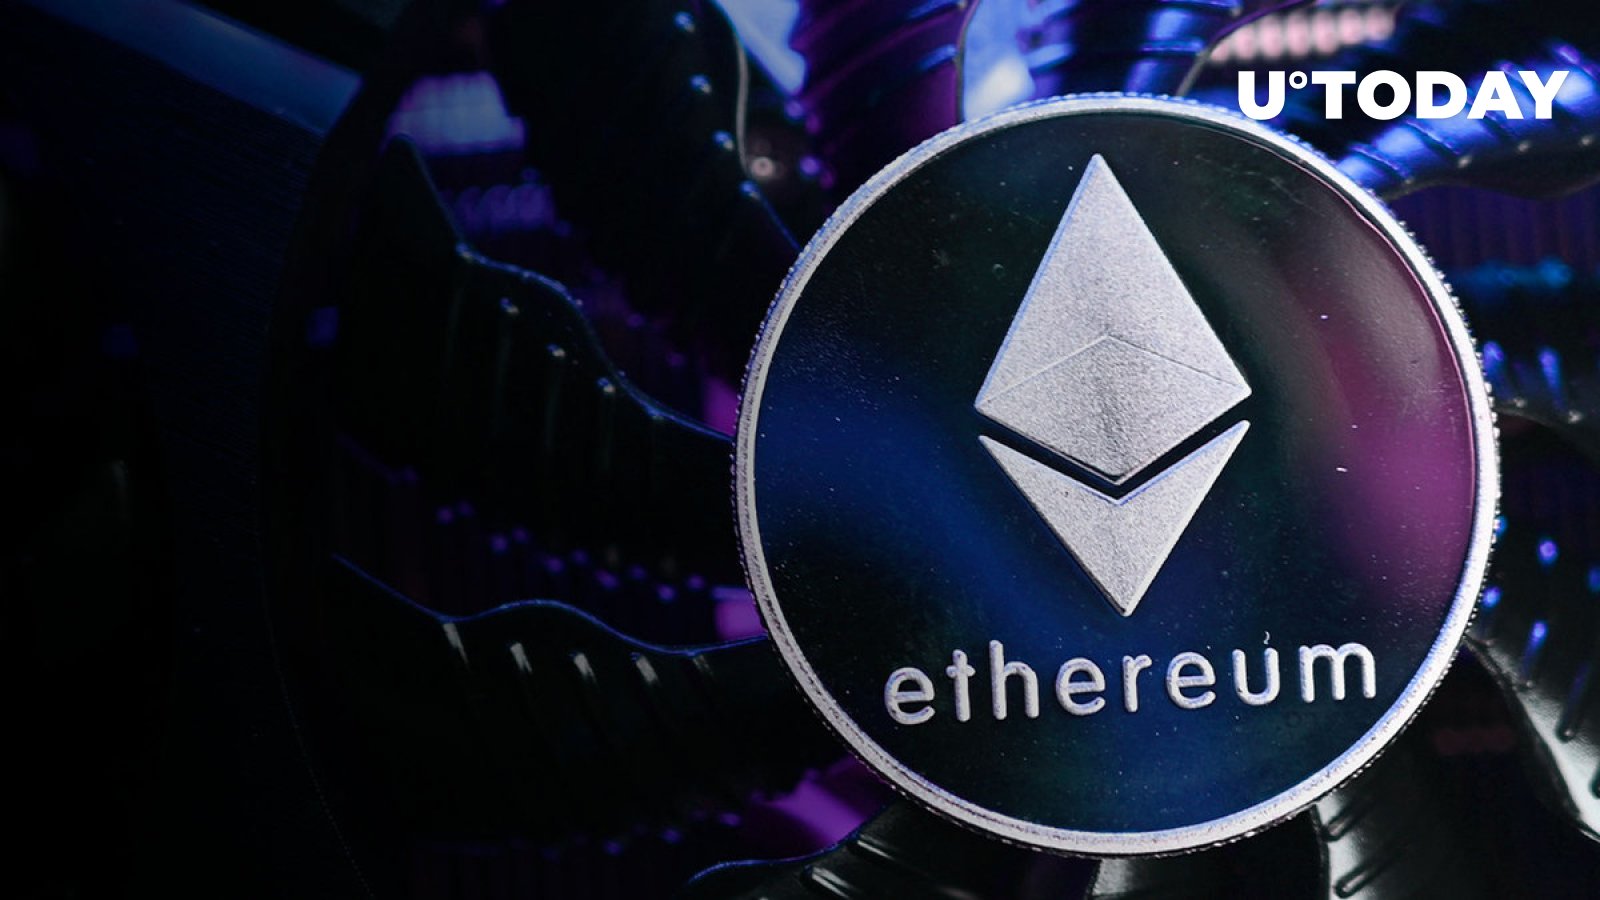 Ethereum (ETH) Drops to Important Support Level, Potential Rally Ahead